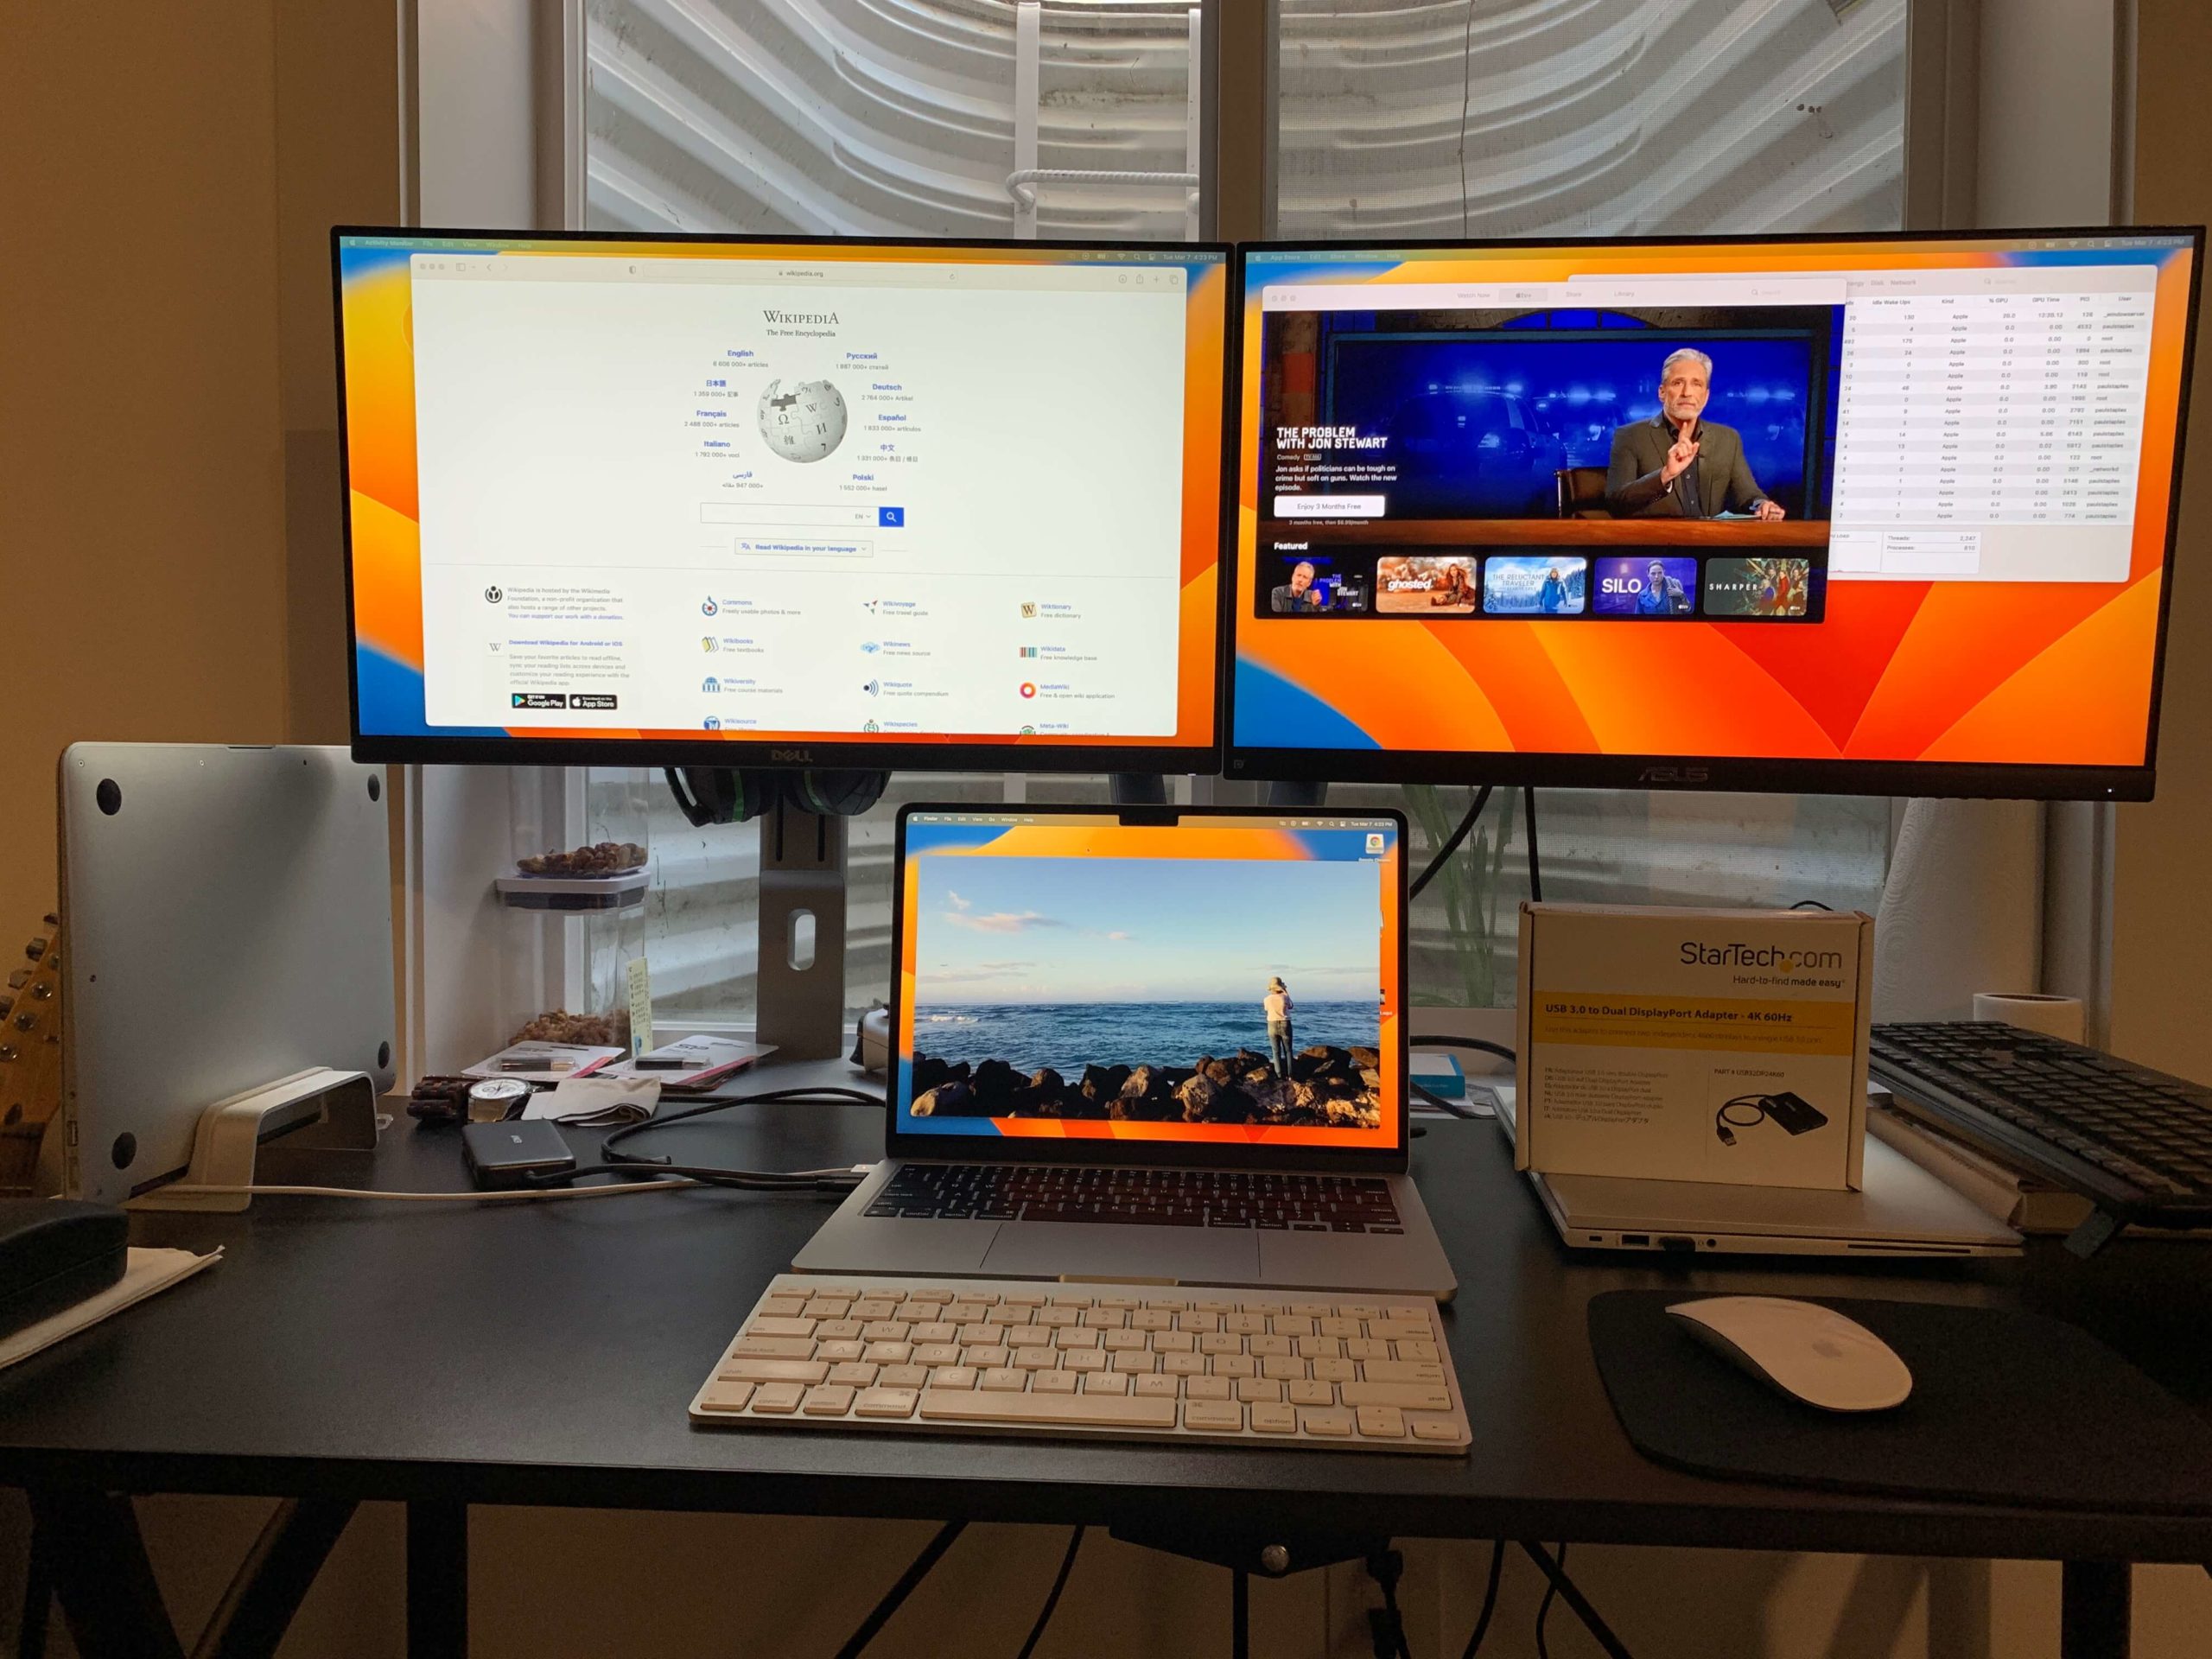 How to connect a monitor to your laptop (Windows 10 and Mac)